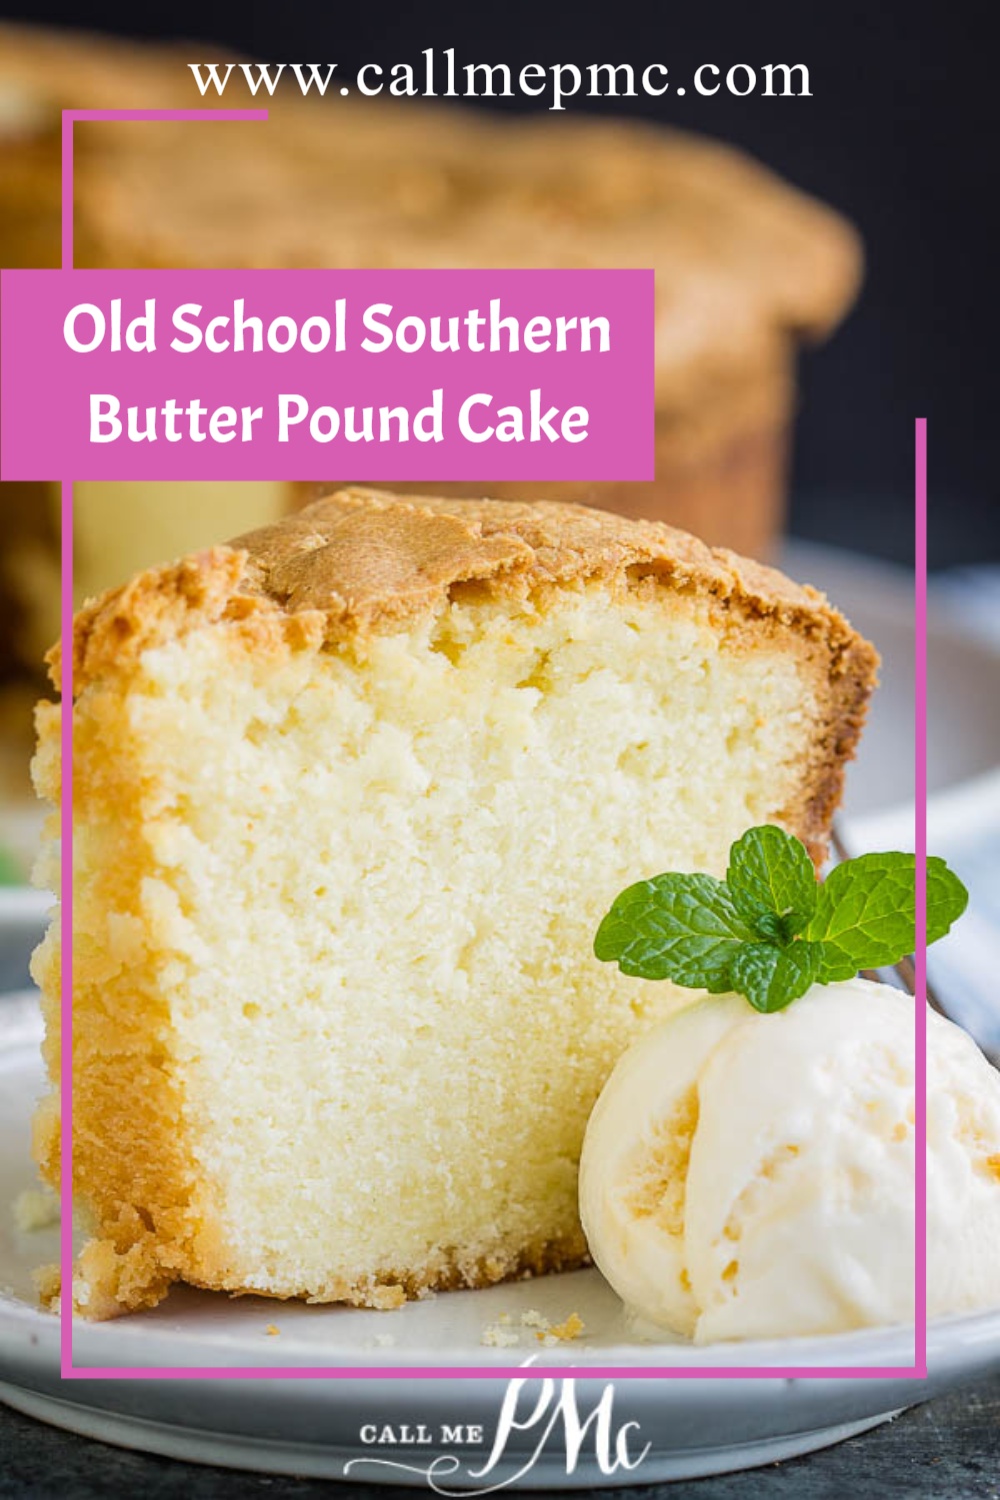 OLD SCHOOL SOUTHERN BUTTER POUND CAKE